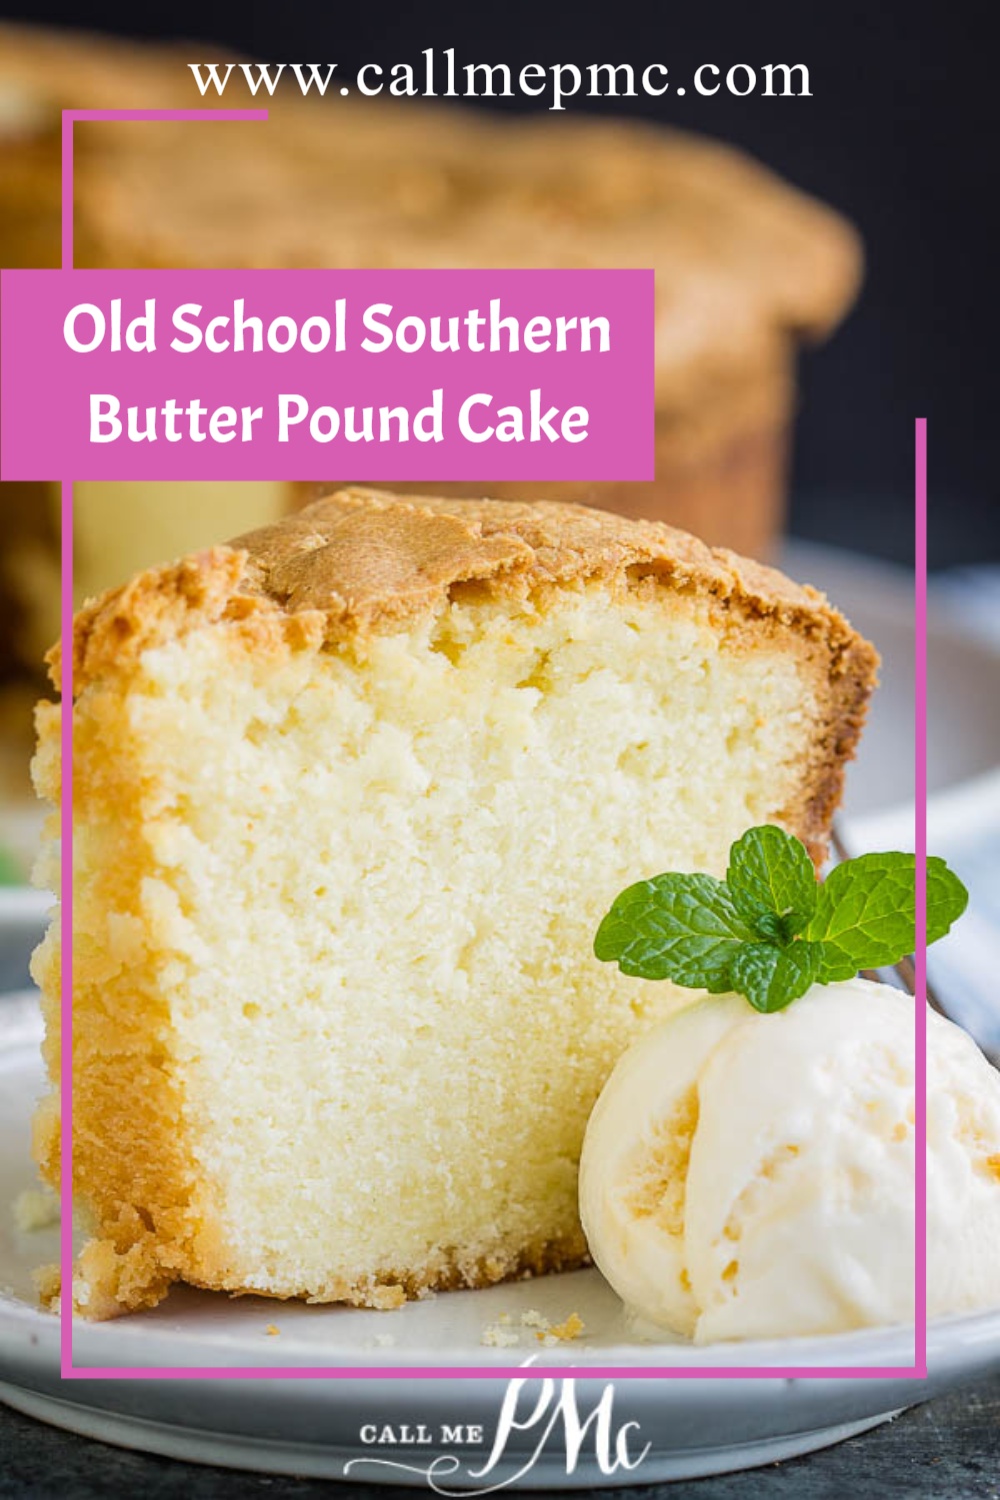 OLD SCHOOL SOUTHERN BUTTER POUND CAKE